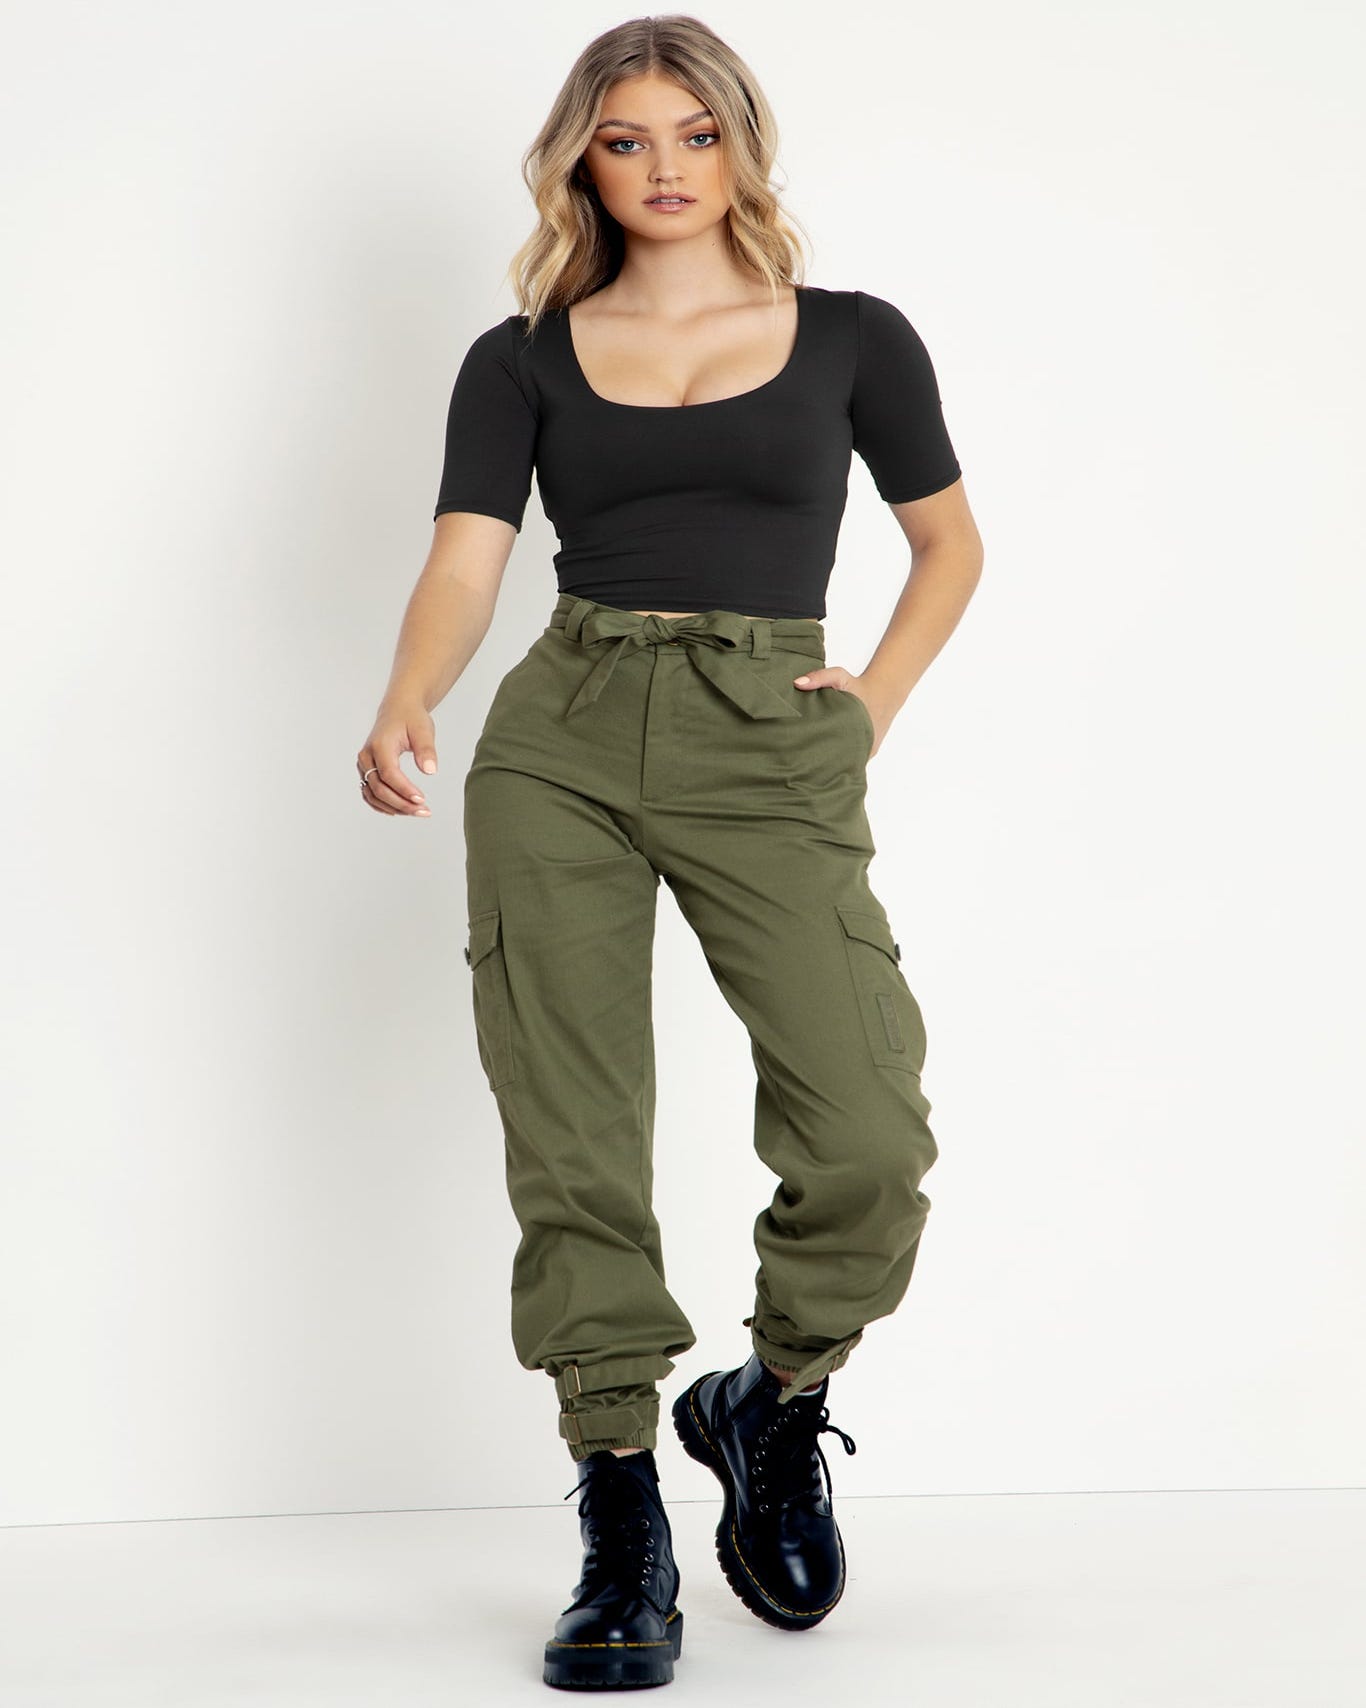 Moss Cargo Pants - Limited